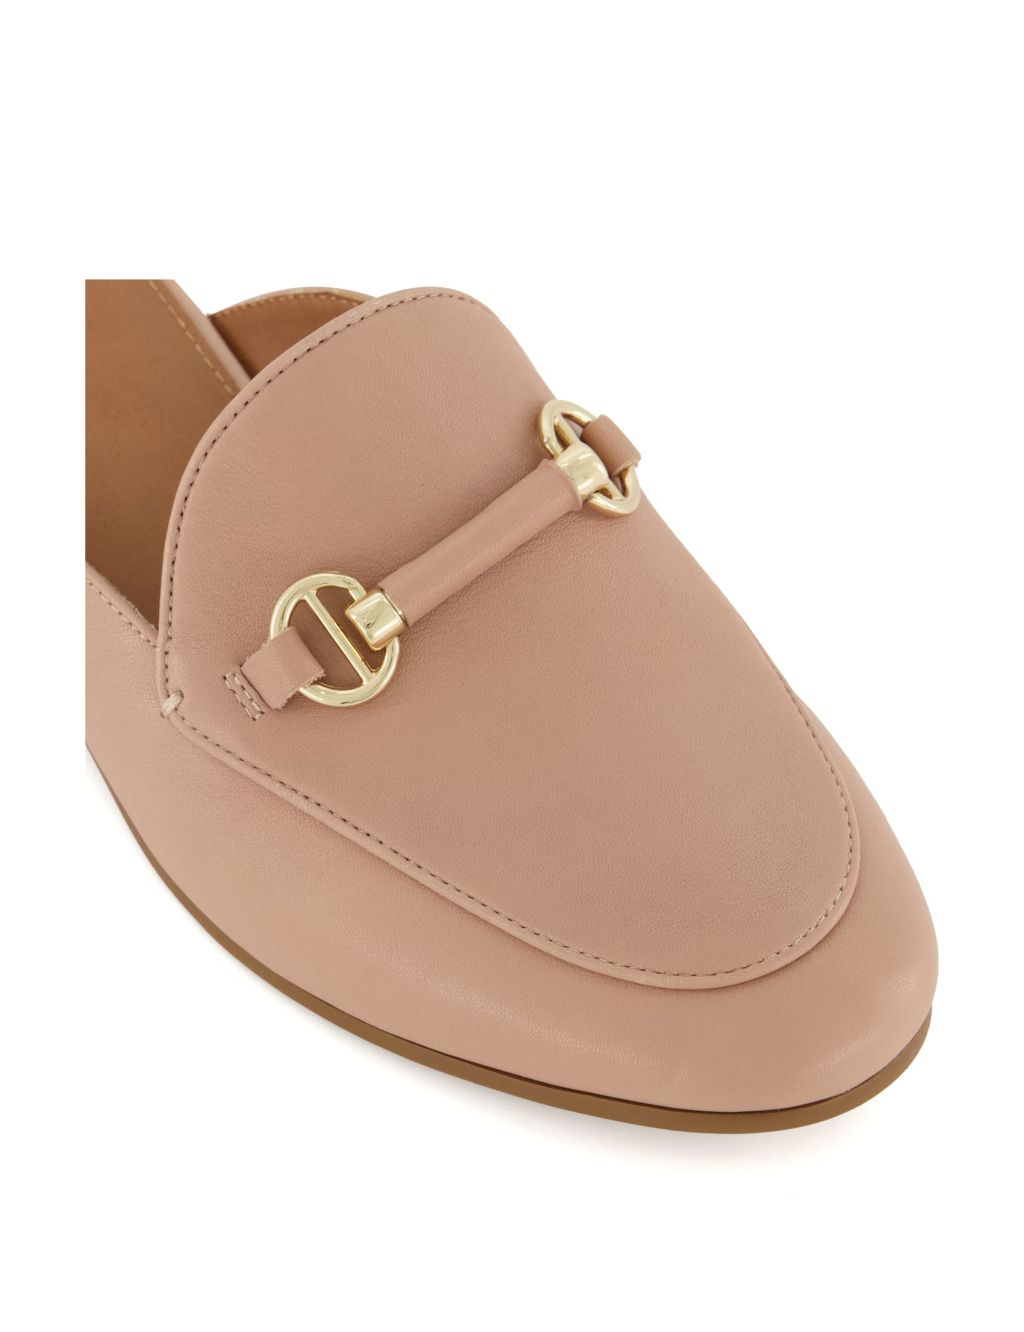 Leather Ring Detail Flat Loafers image 3